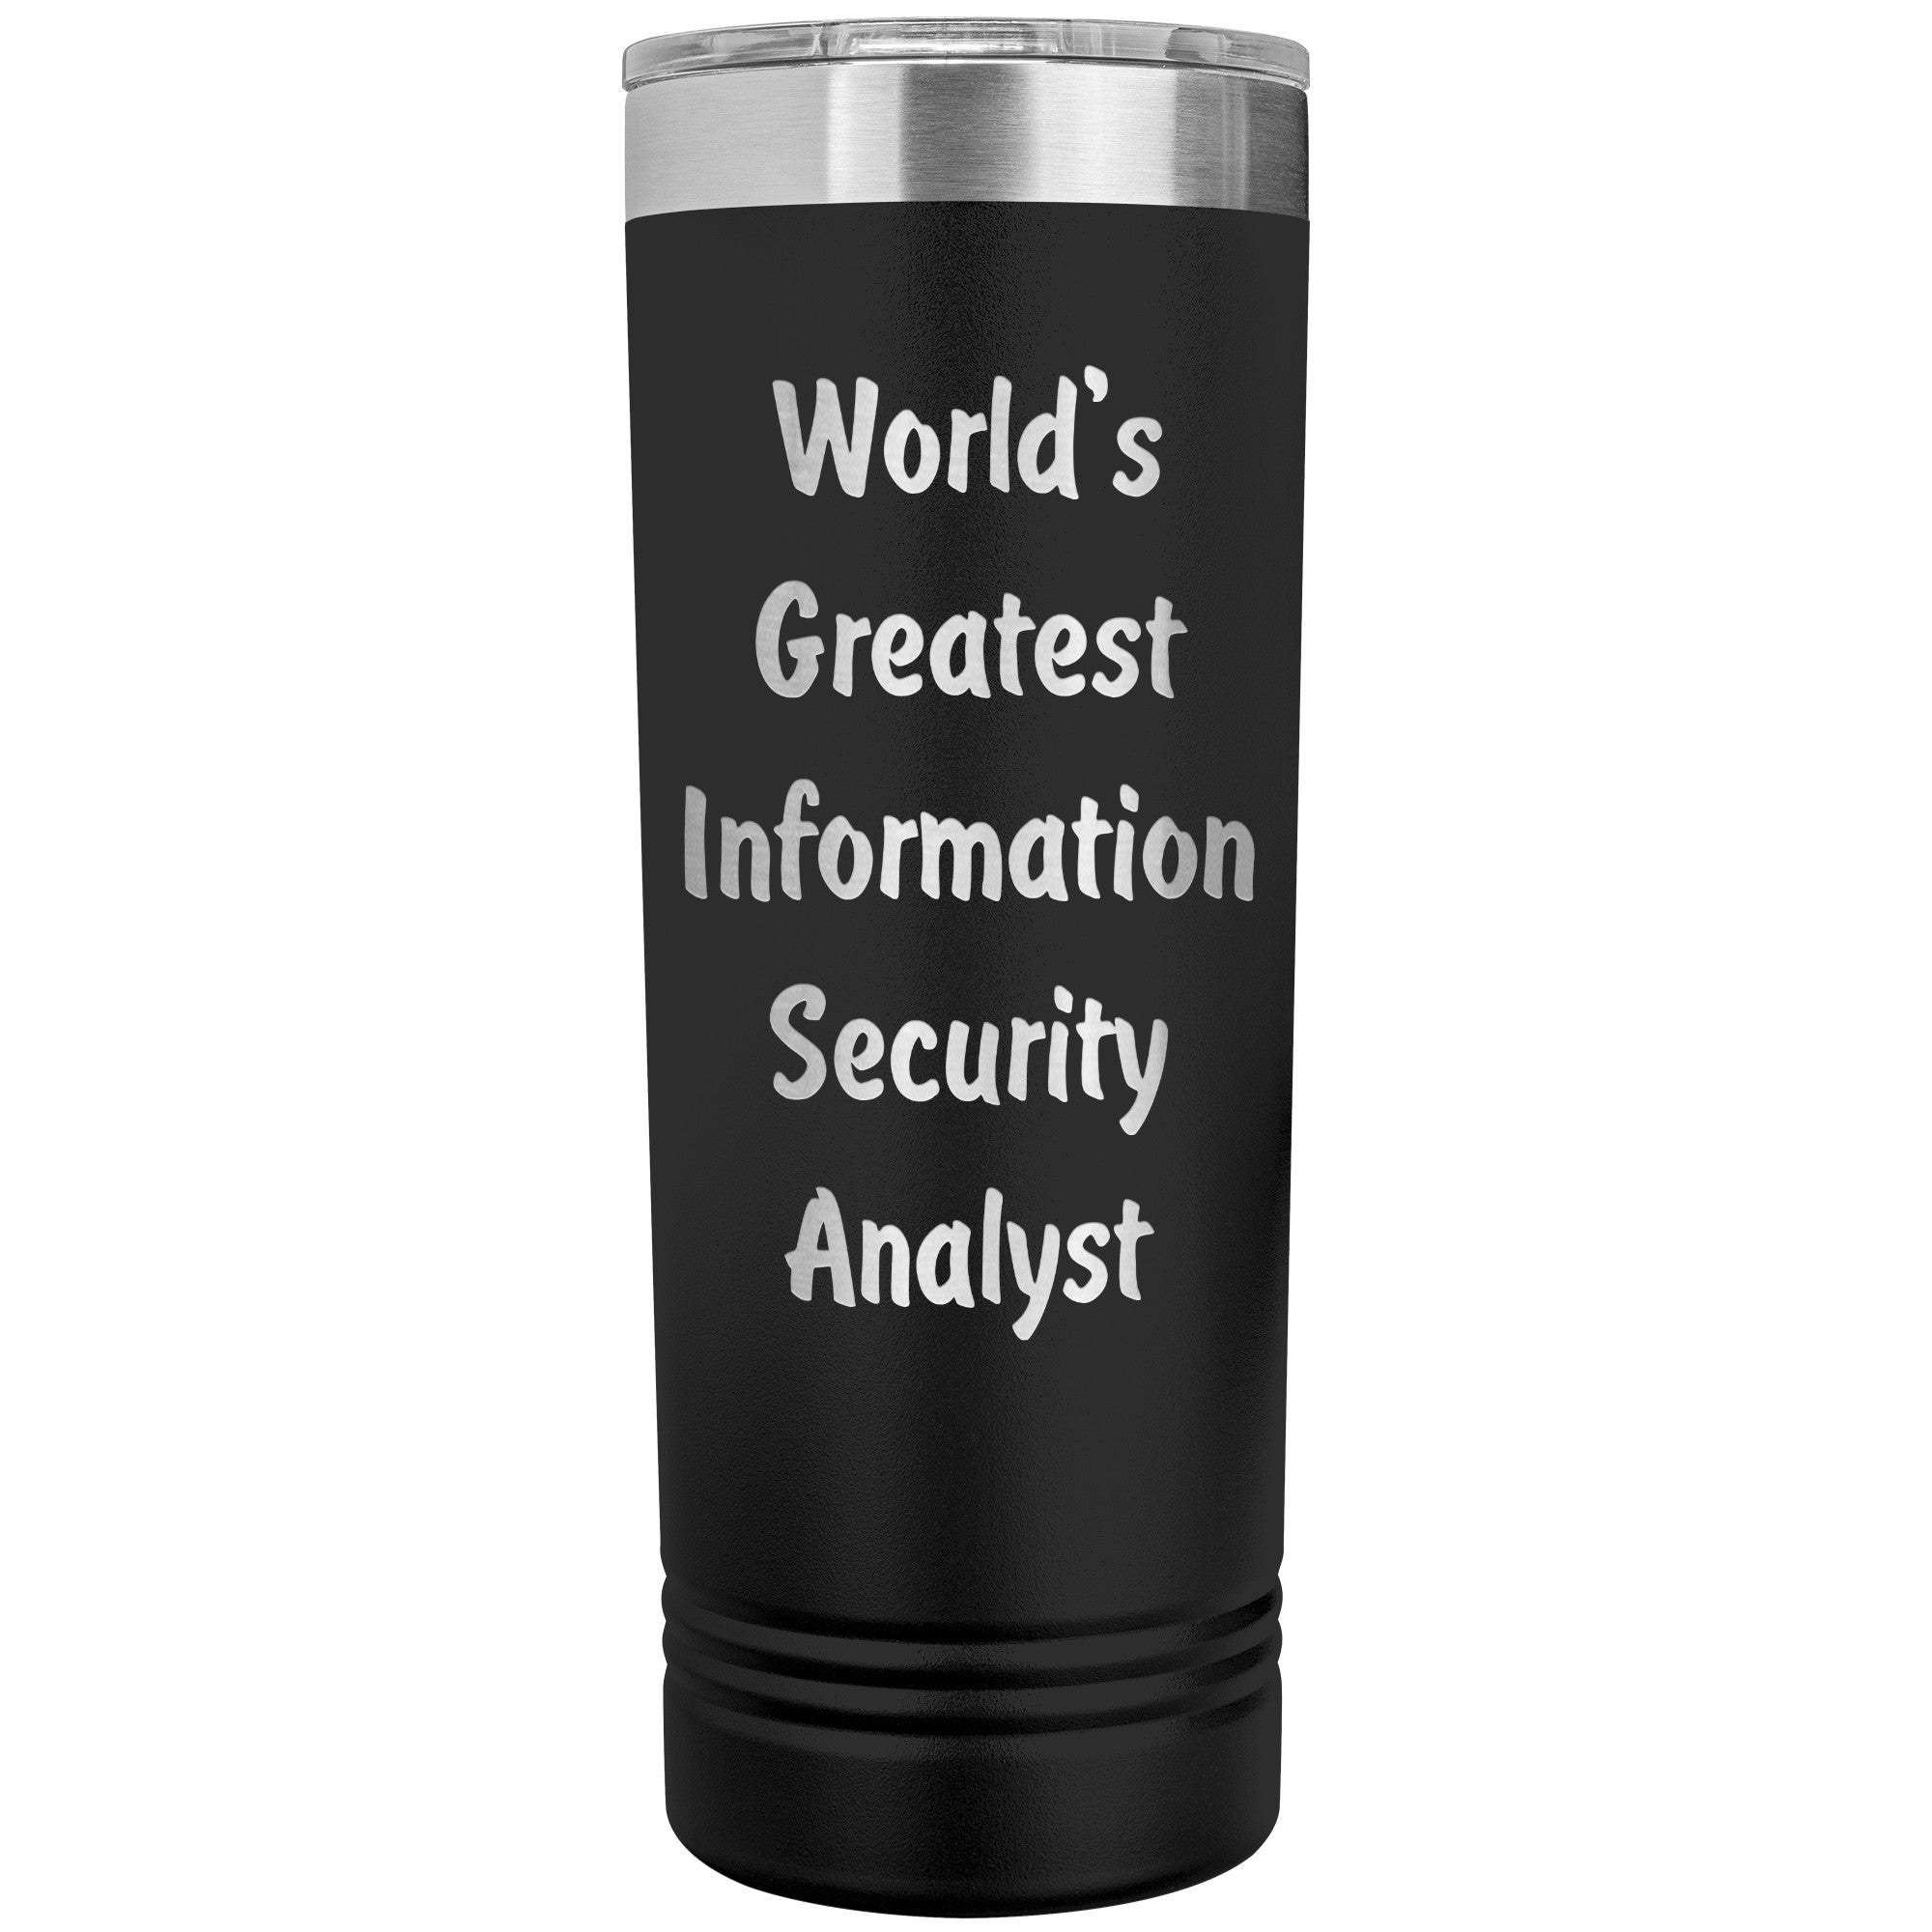 World's Greatest Information Security Analyst - 22oz Insulated Skinny Tumbler